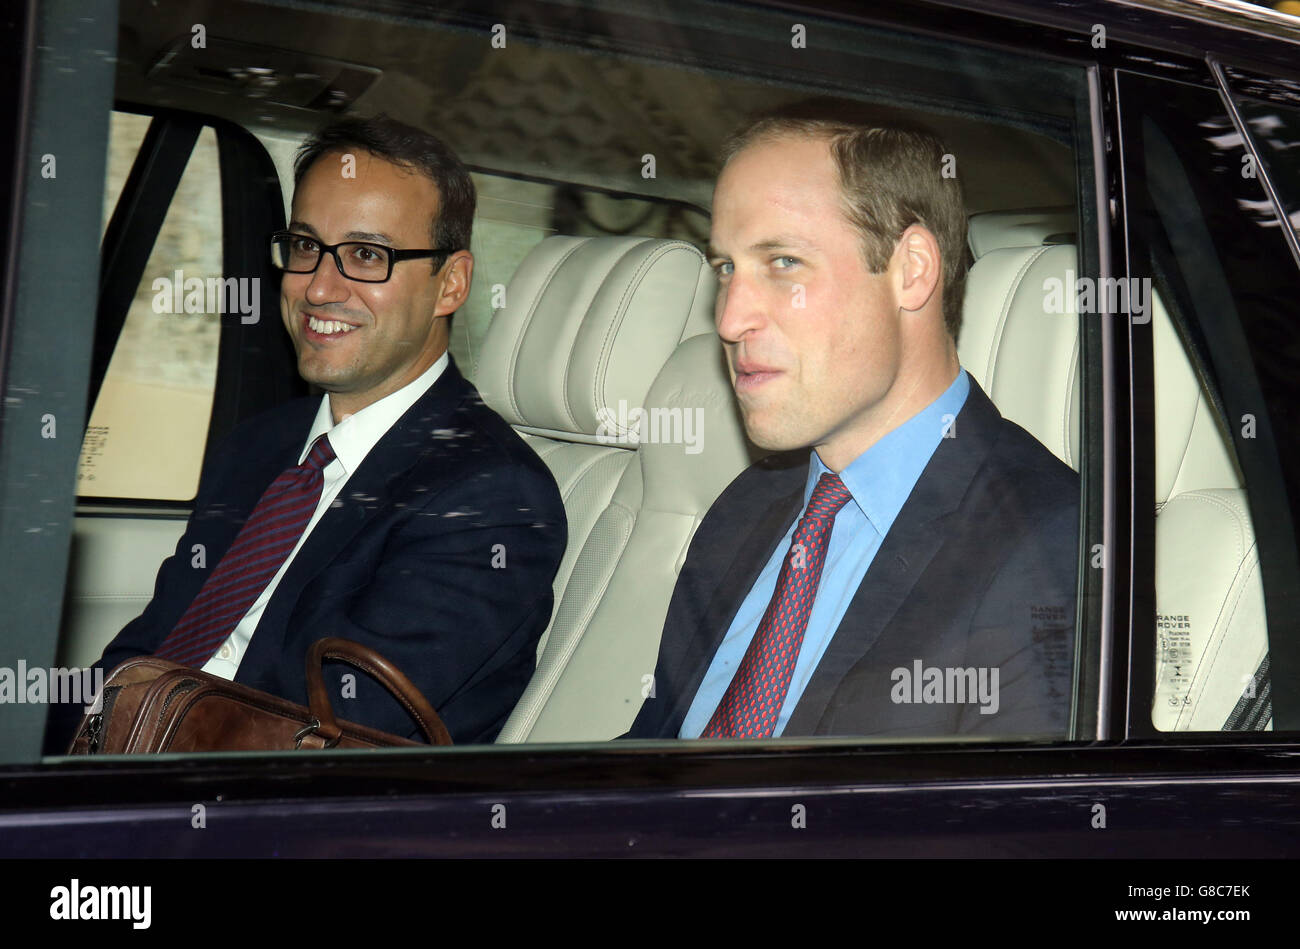 The Duke of Cambridge alongside his Private Secretary Miguel Head as they leave St John's college at the University of Cambridge where he officially opened the School of Pythagoras Archive Centre. Stock Photo